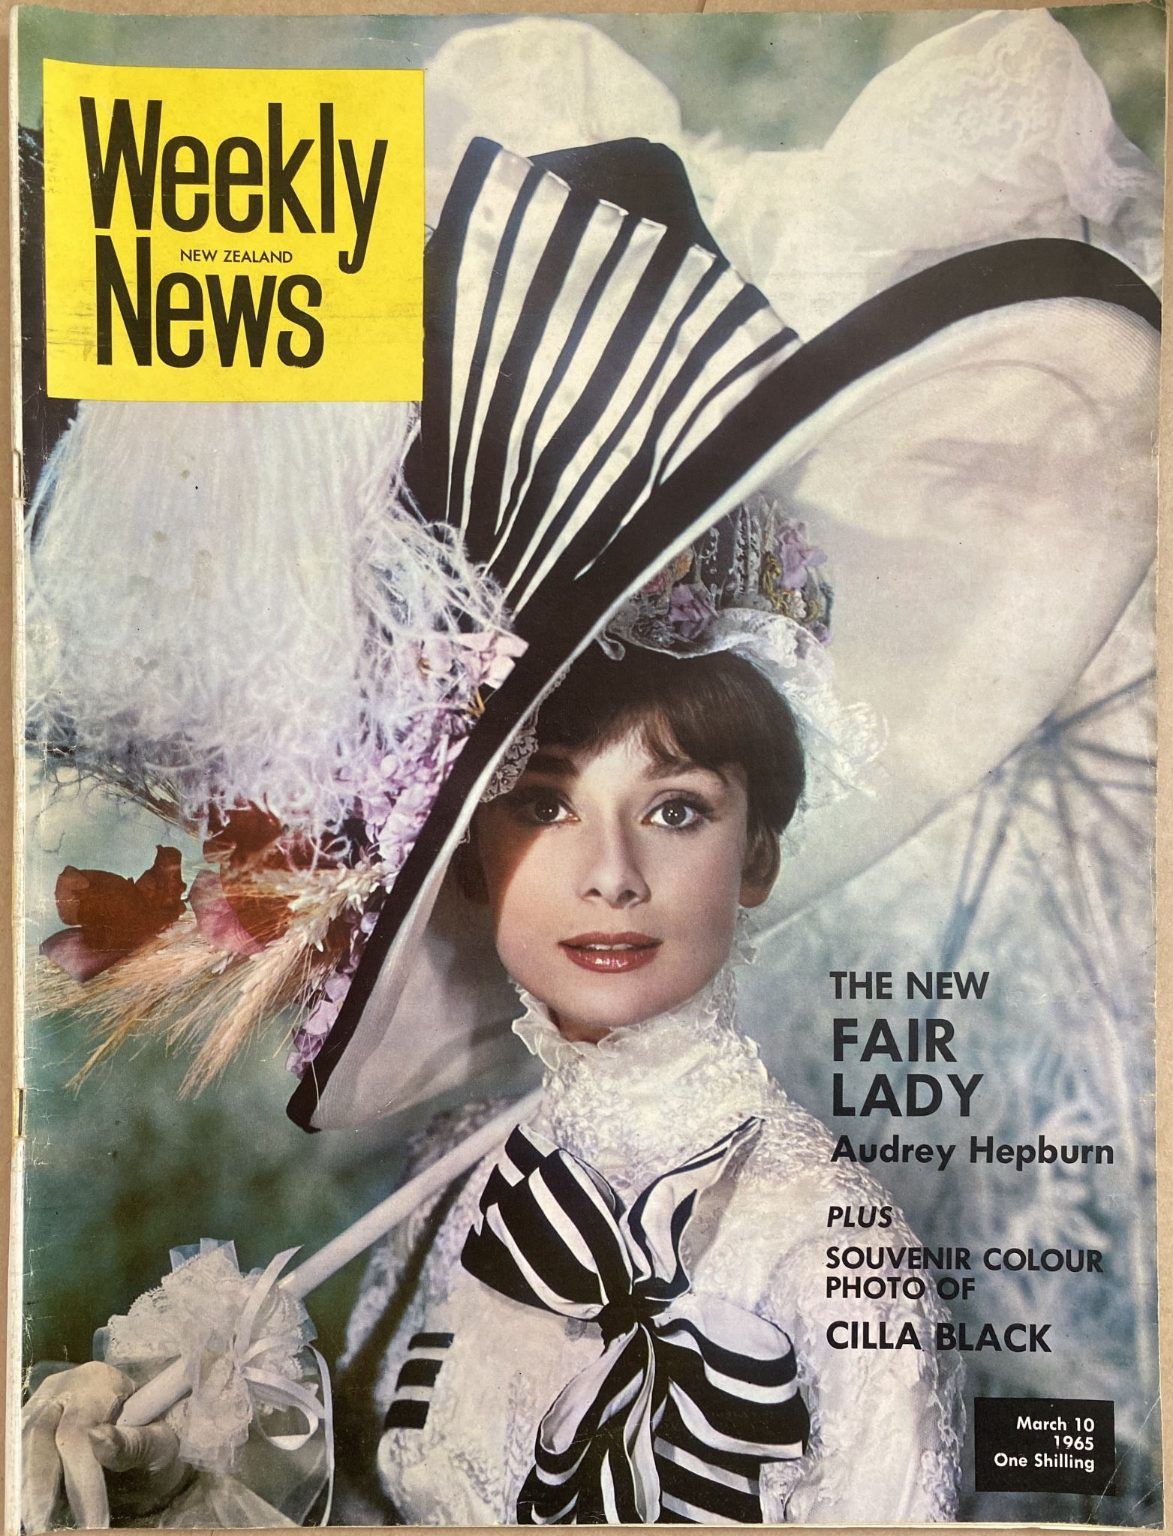 OLD NEWSPAPER: New Zealand Weekly News, No. 5285, 10 March 1965